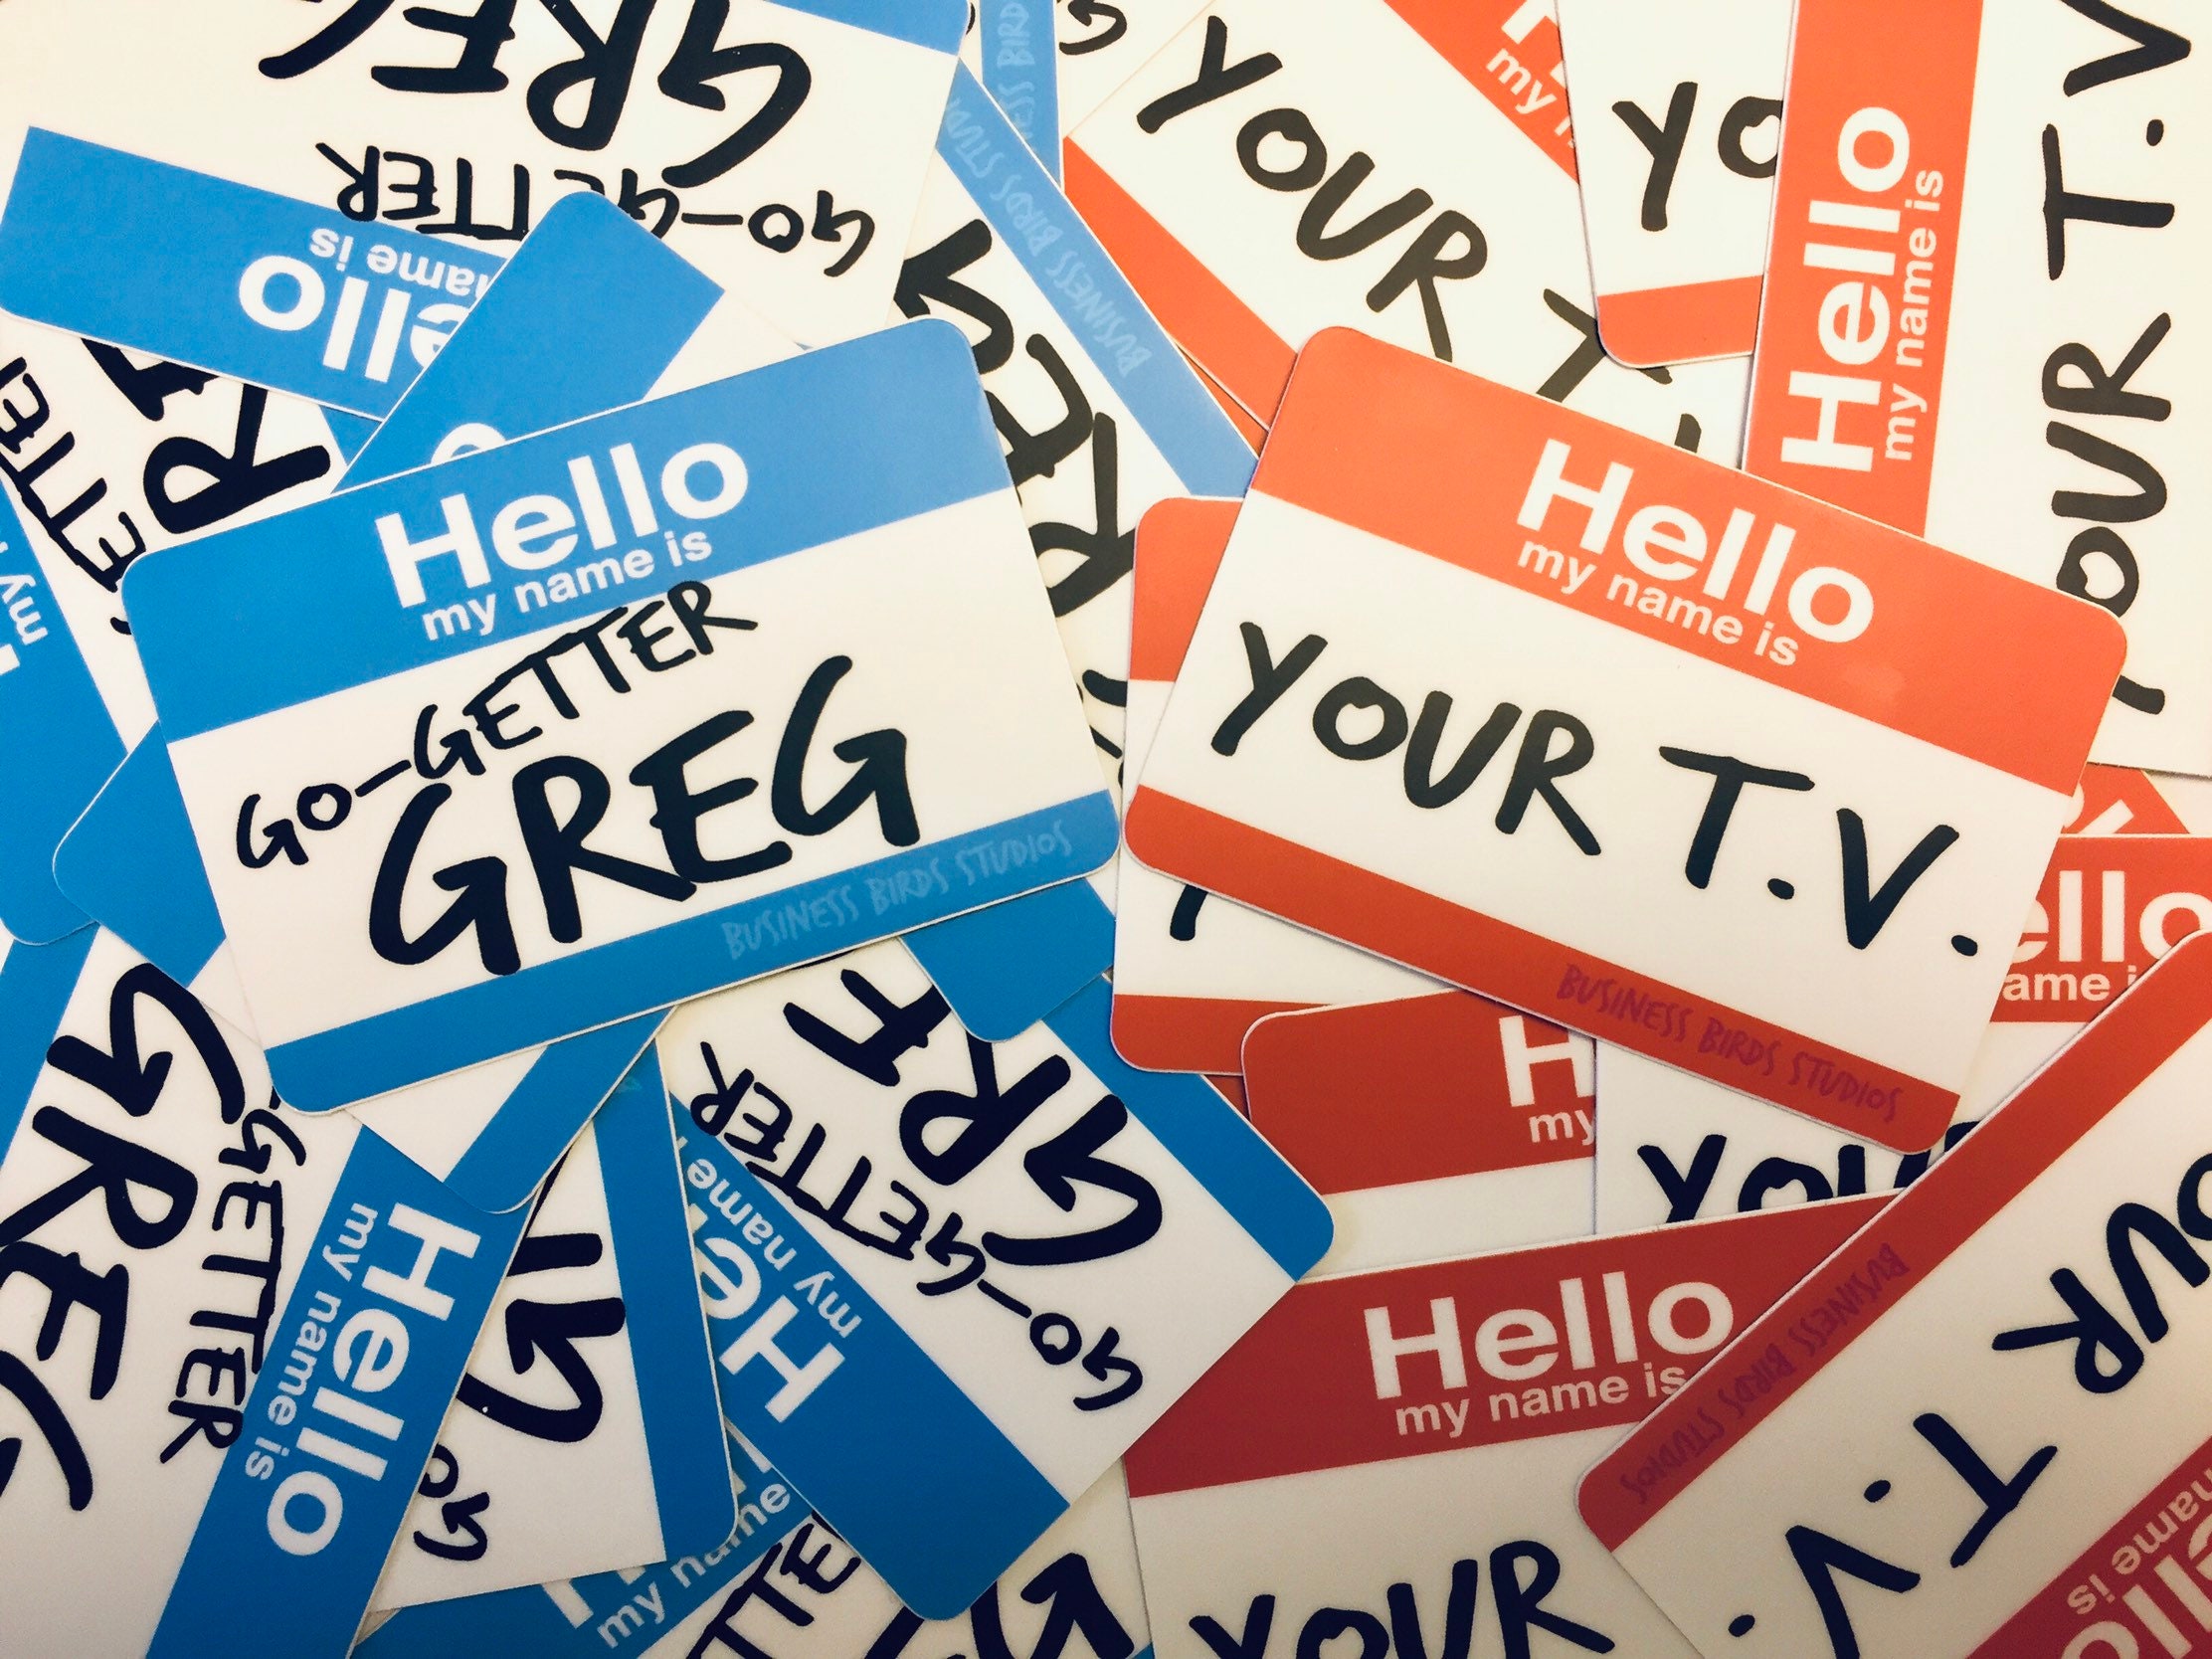 LUDO Rock Band Go-getter Greg / Hello, My Name is Your TV Vinyl Stickers,  Stickers, Music Stickers, Ludo Stickers, Ludo Band, Ludo Rock 